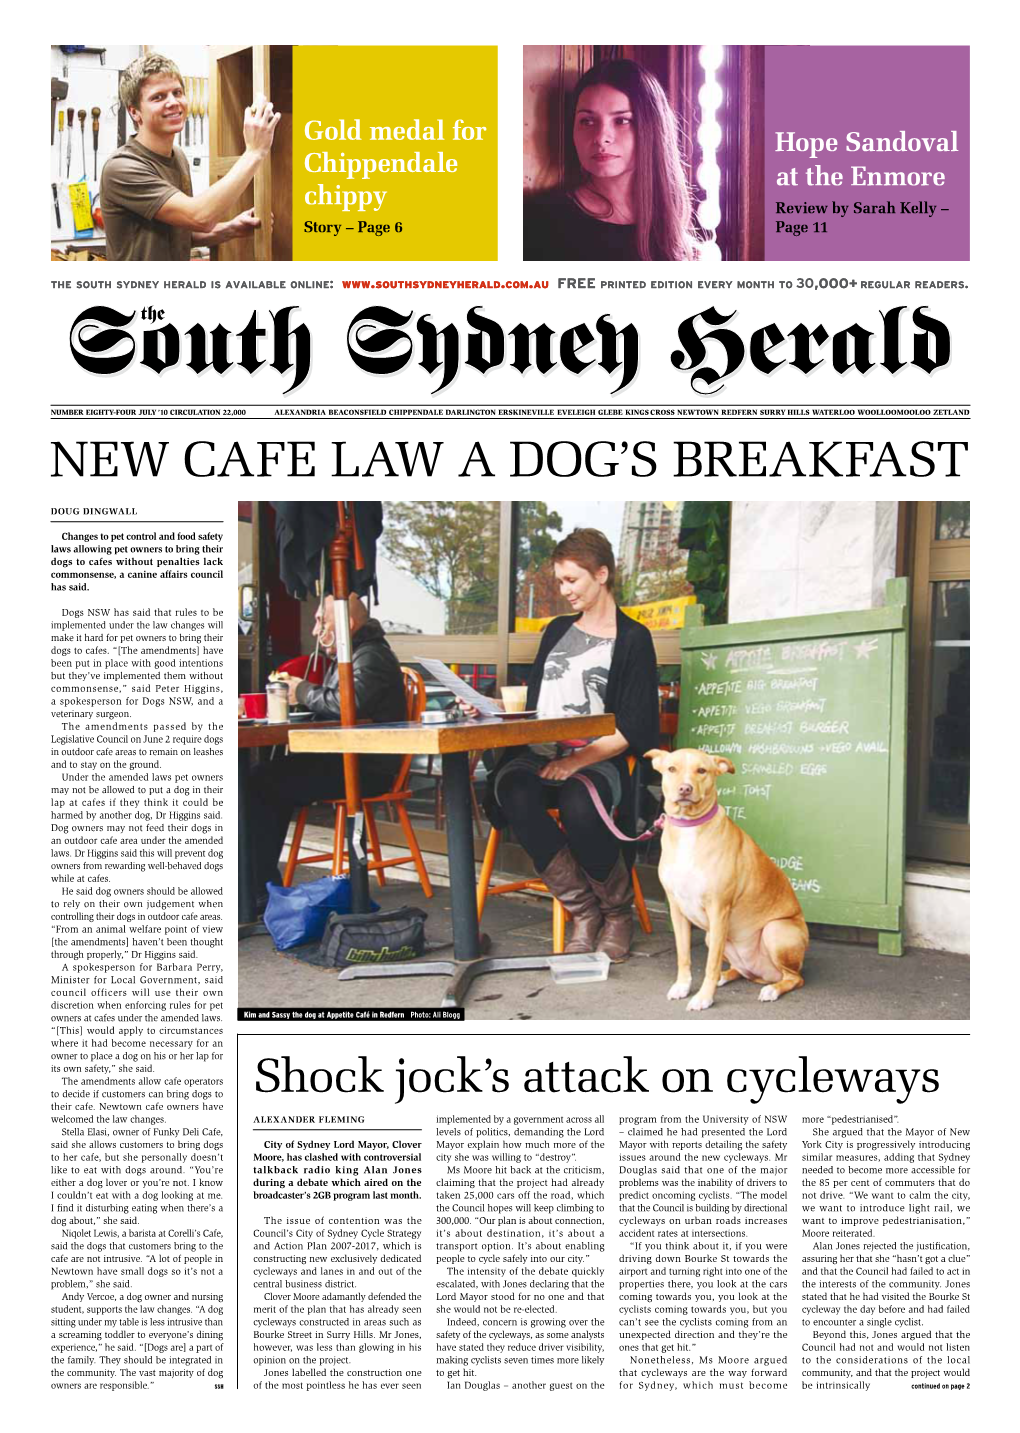 New Cafe Law a Dog's Breakfast